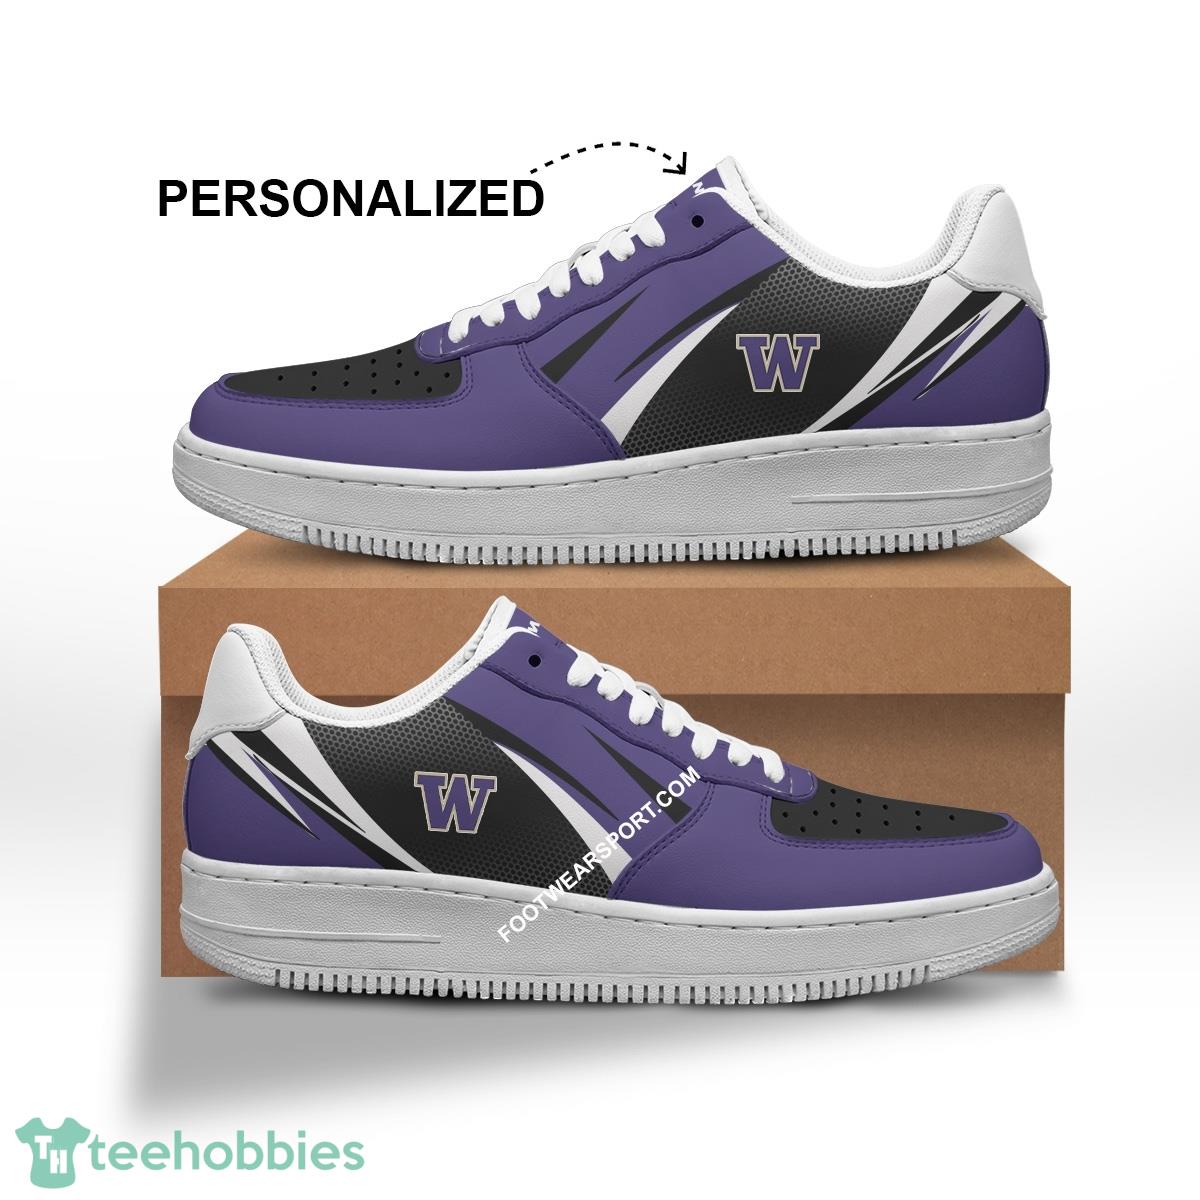 Custom Name Washington Huskies Air Force 1 Shoes Trending Design For Fans Gift - NCAA Washington Huskies Air Force 1 Shoes Personalized Style 1